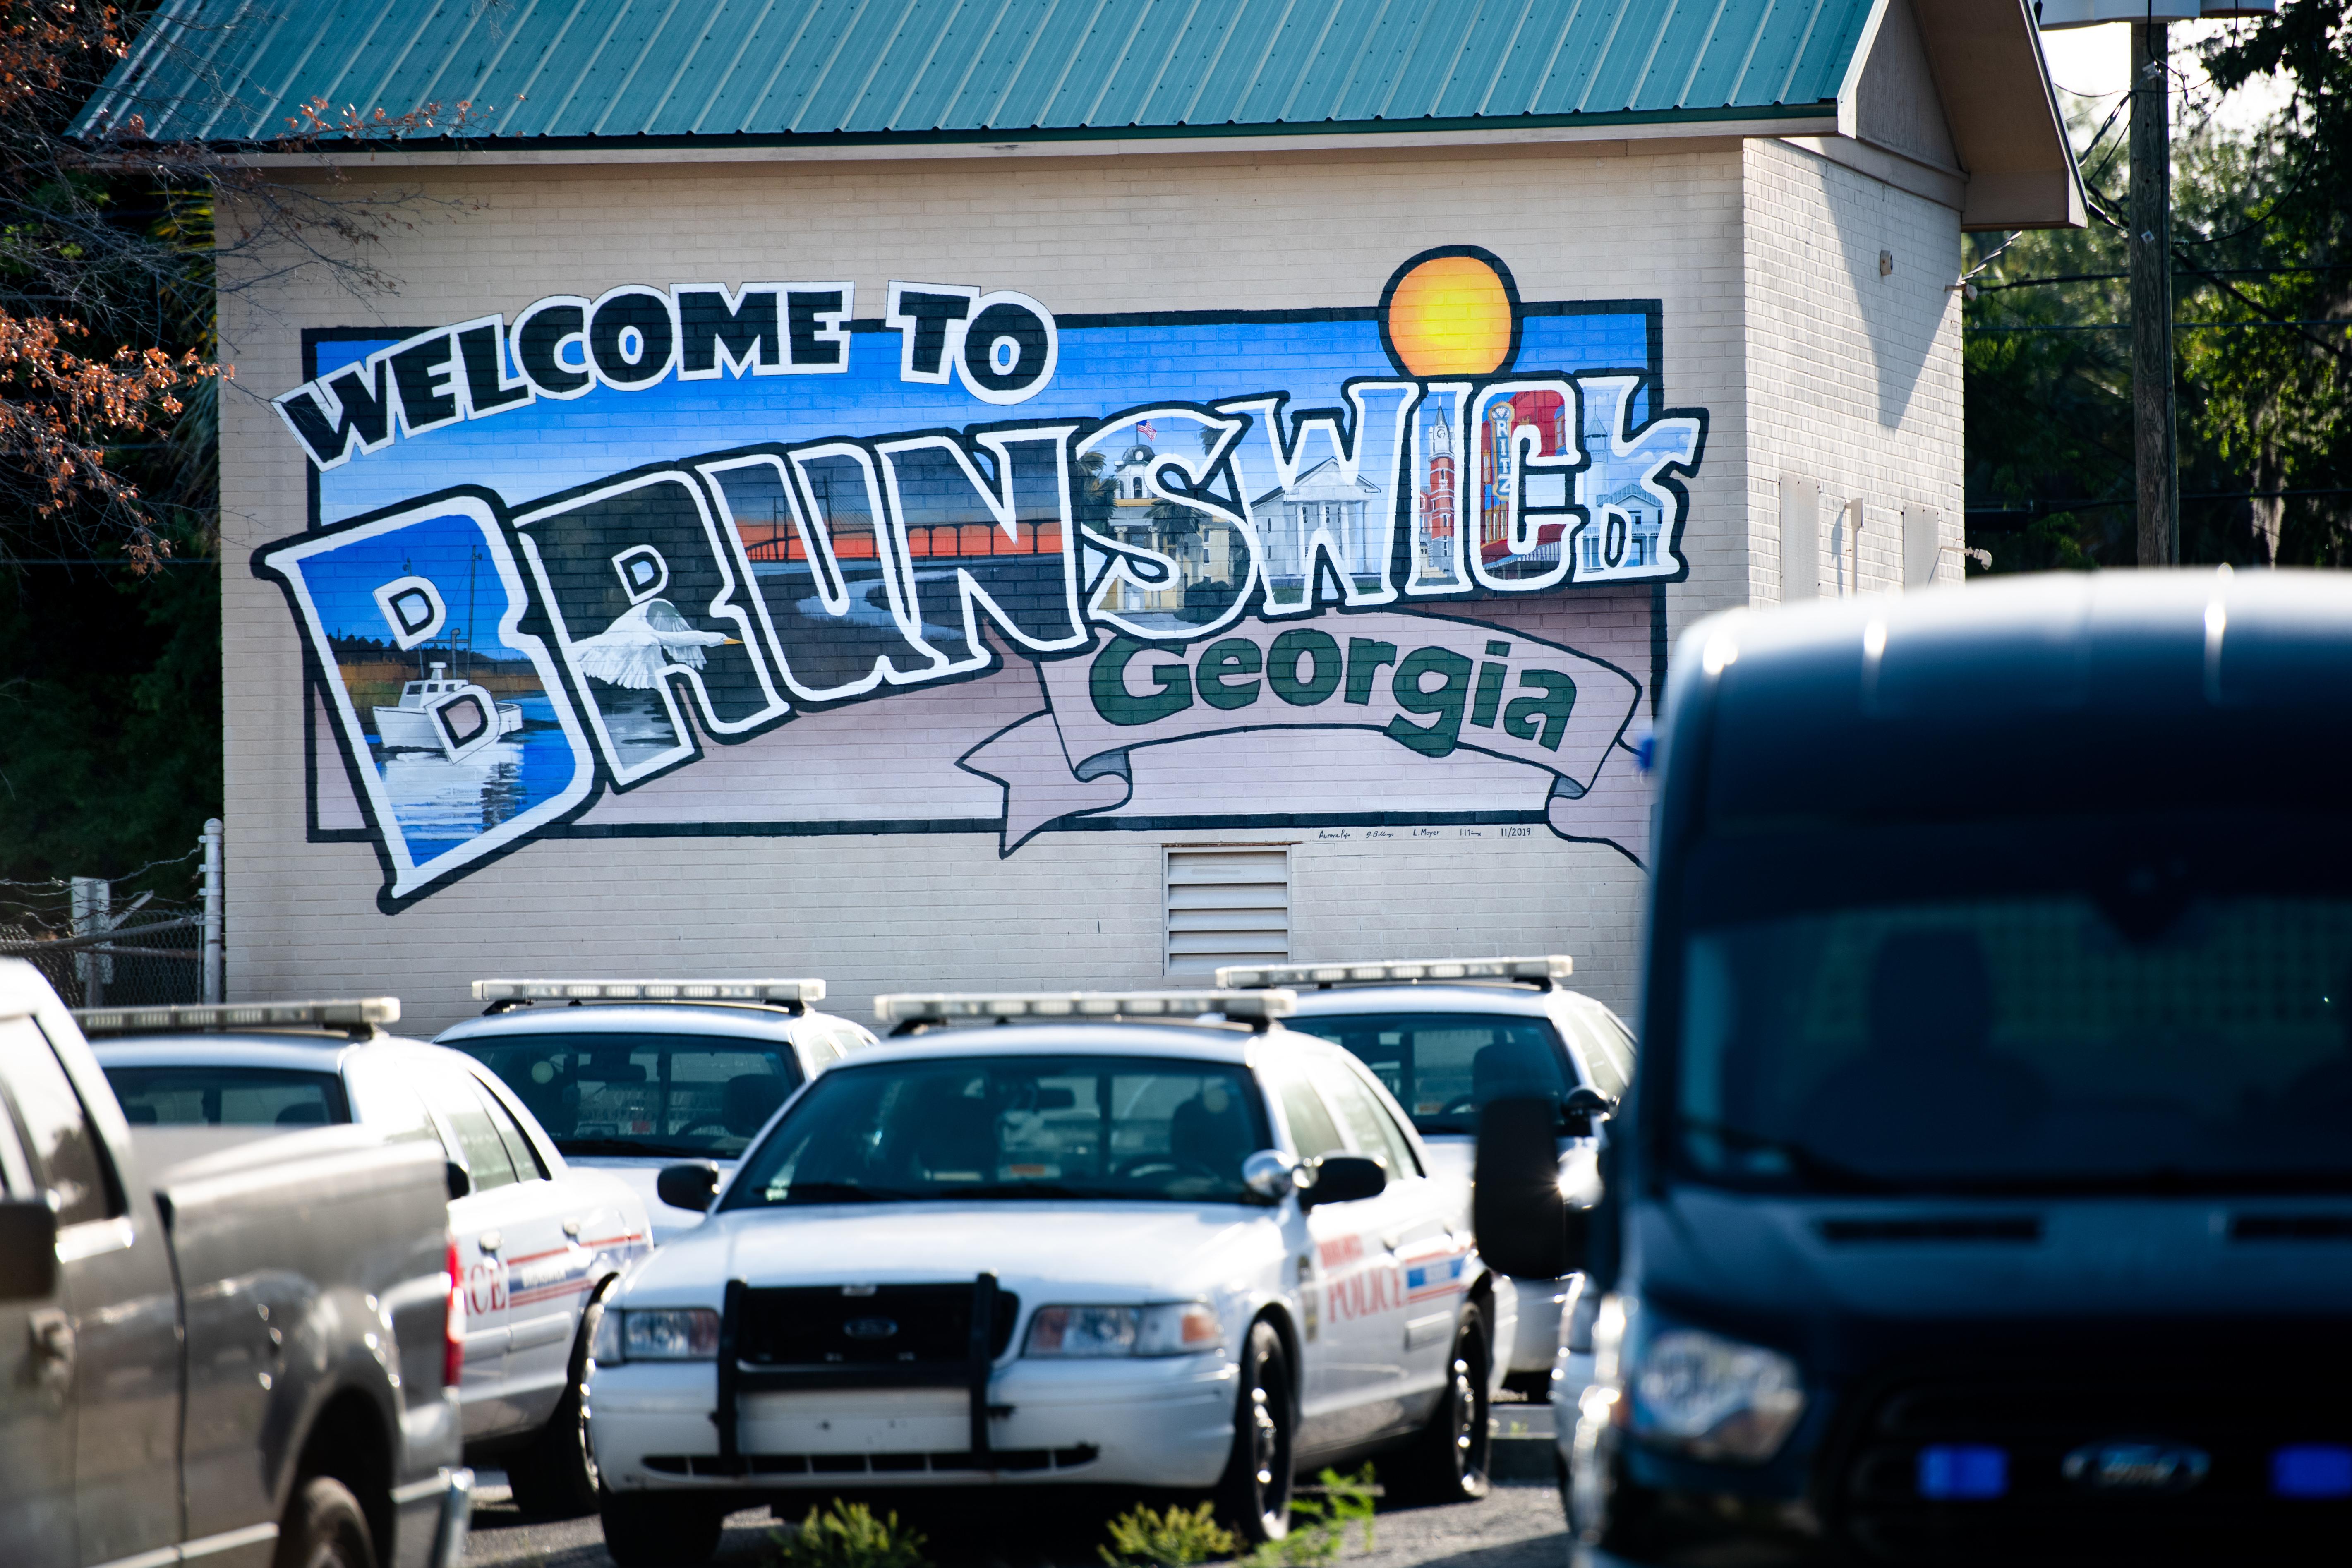 A mural that says "Welcome to Brunswick Georgia" on a building with police cars parked in front of it